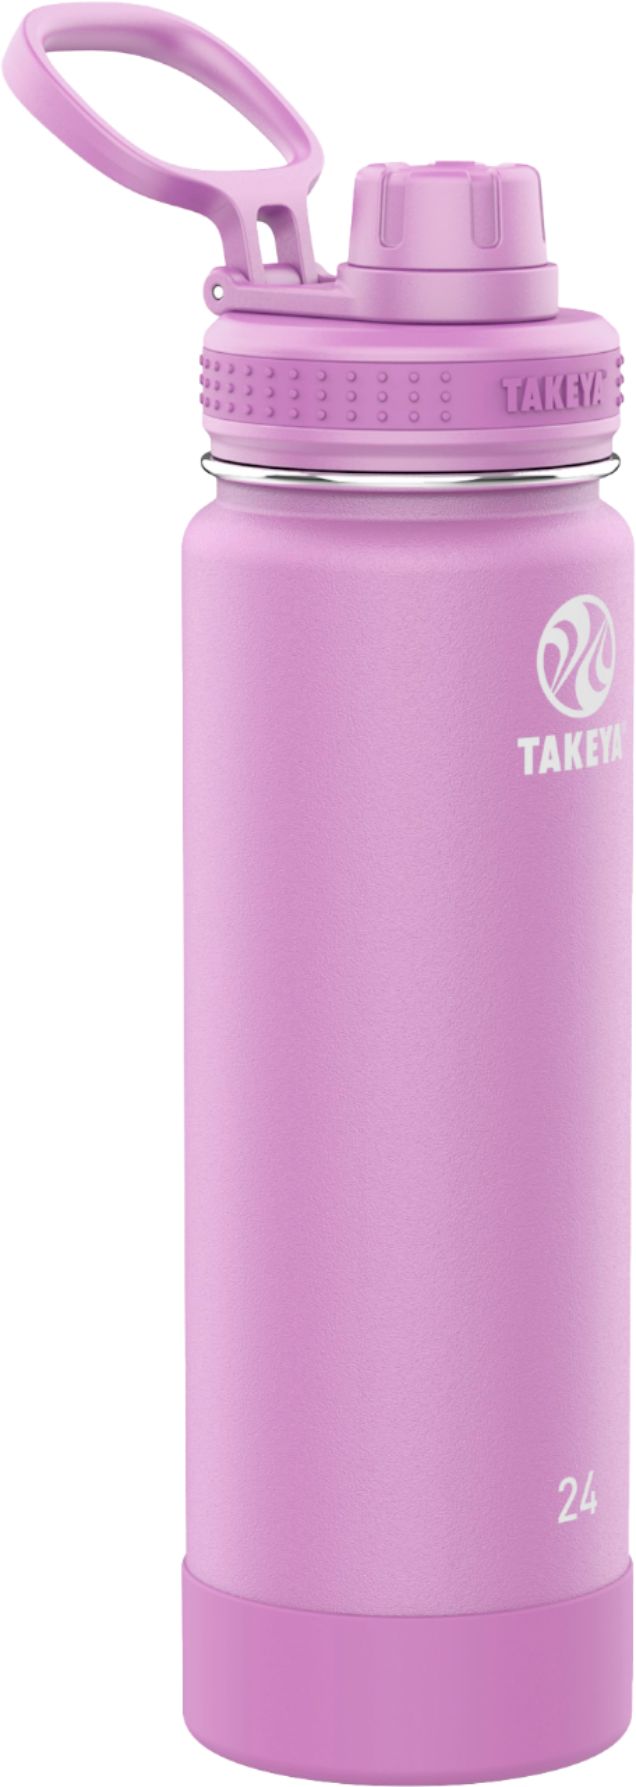 18oz Takeya Actives Insulated Stainless Water Bottle with Insulated Spout Lid Violet 